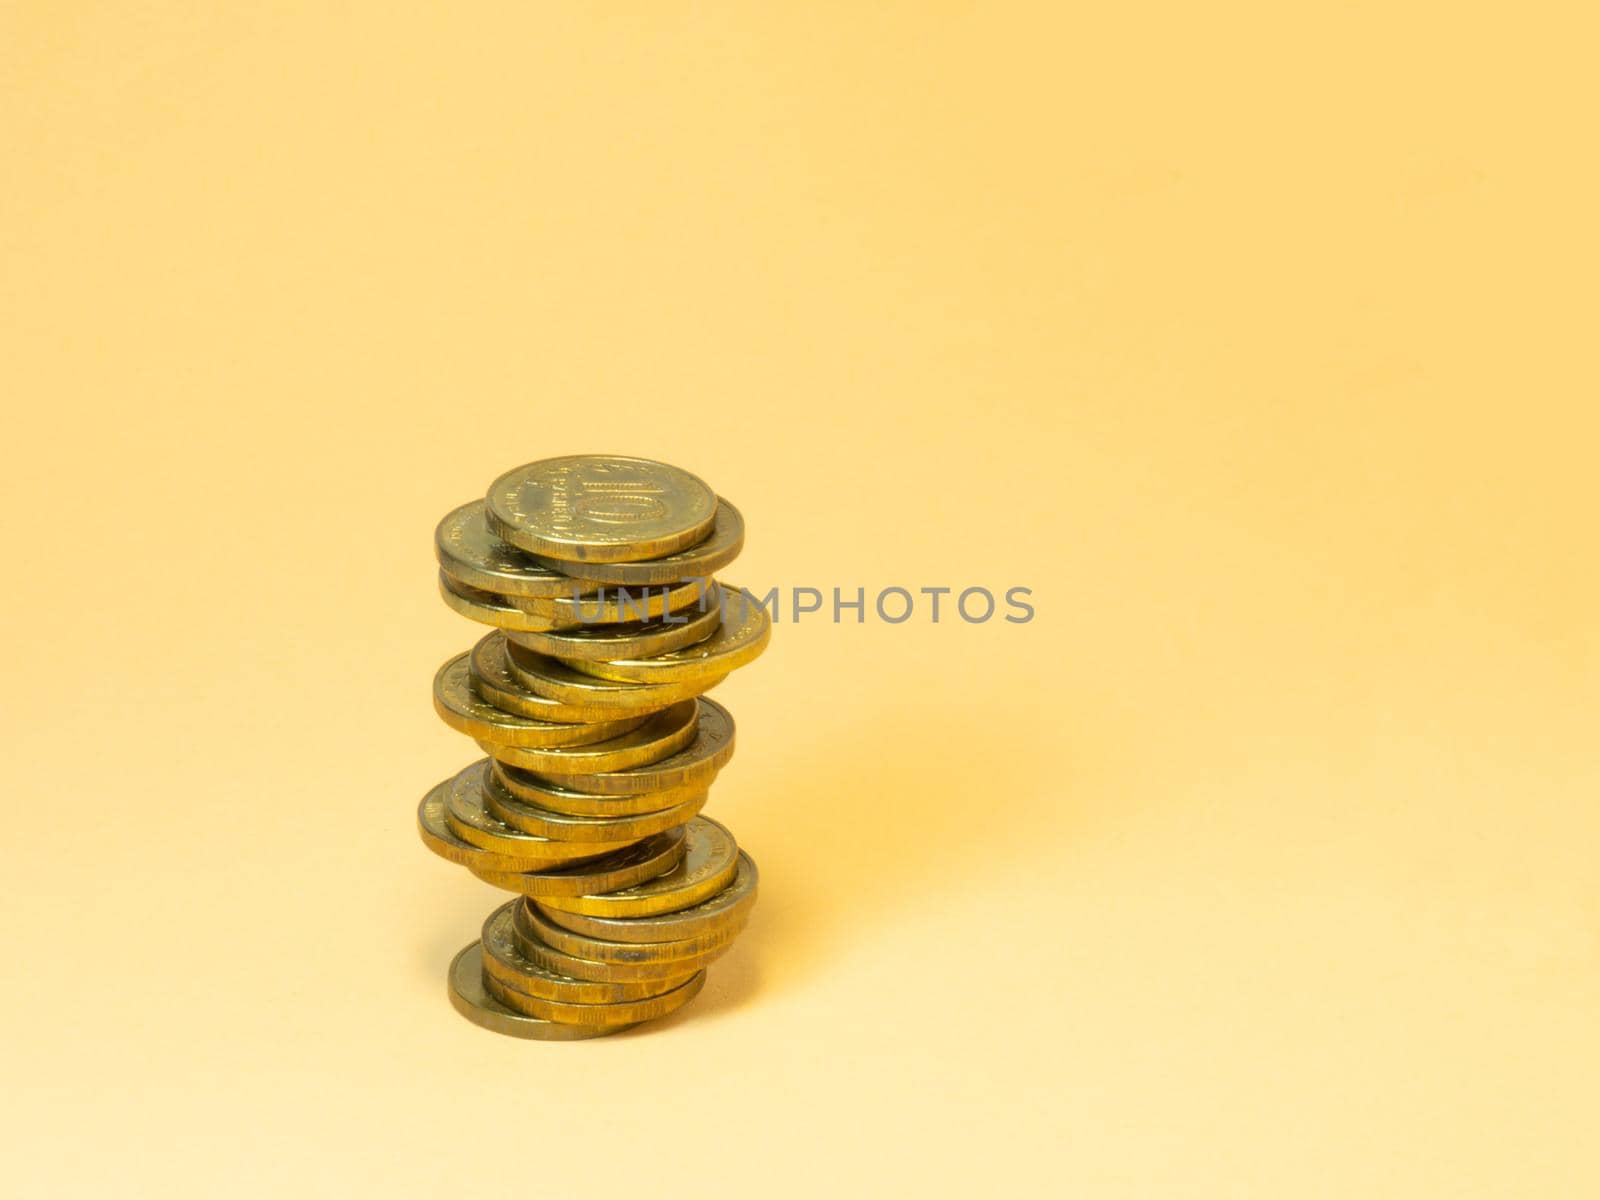 A turret made of coins. Money on yellow background by Puludi